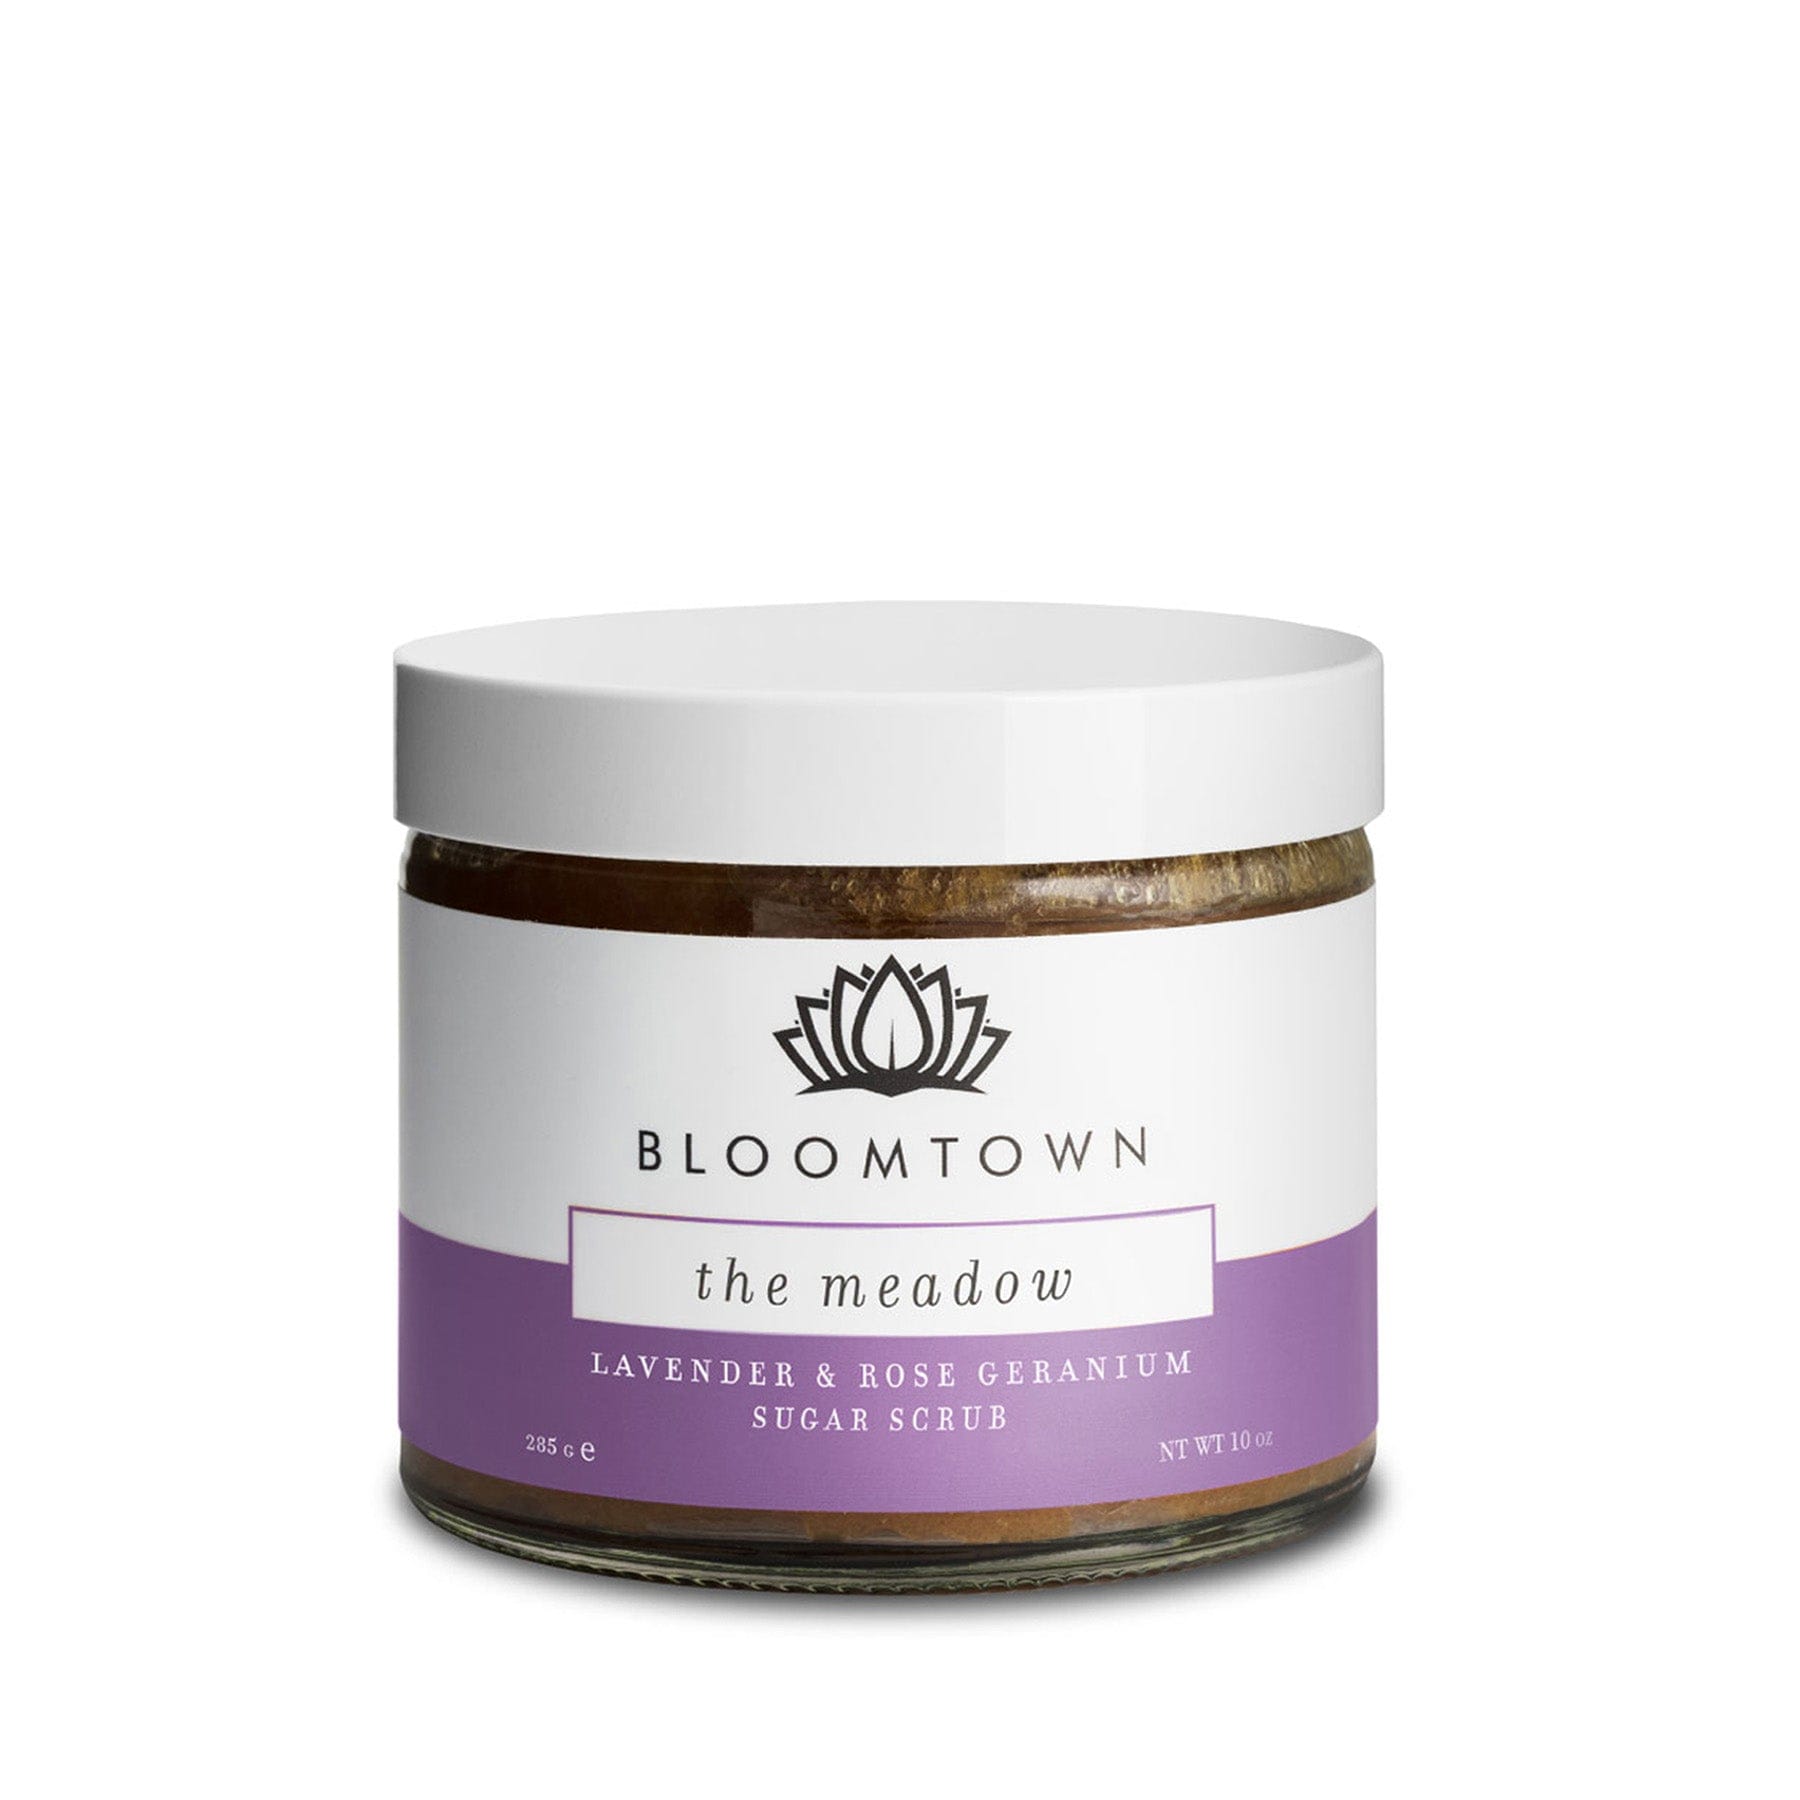 Bloomtown The Meadow Lavender & Rose Geranium Sugar Scrub in a glass jar with white and purple label on a white background.